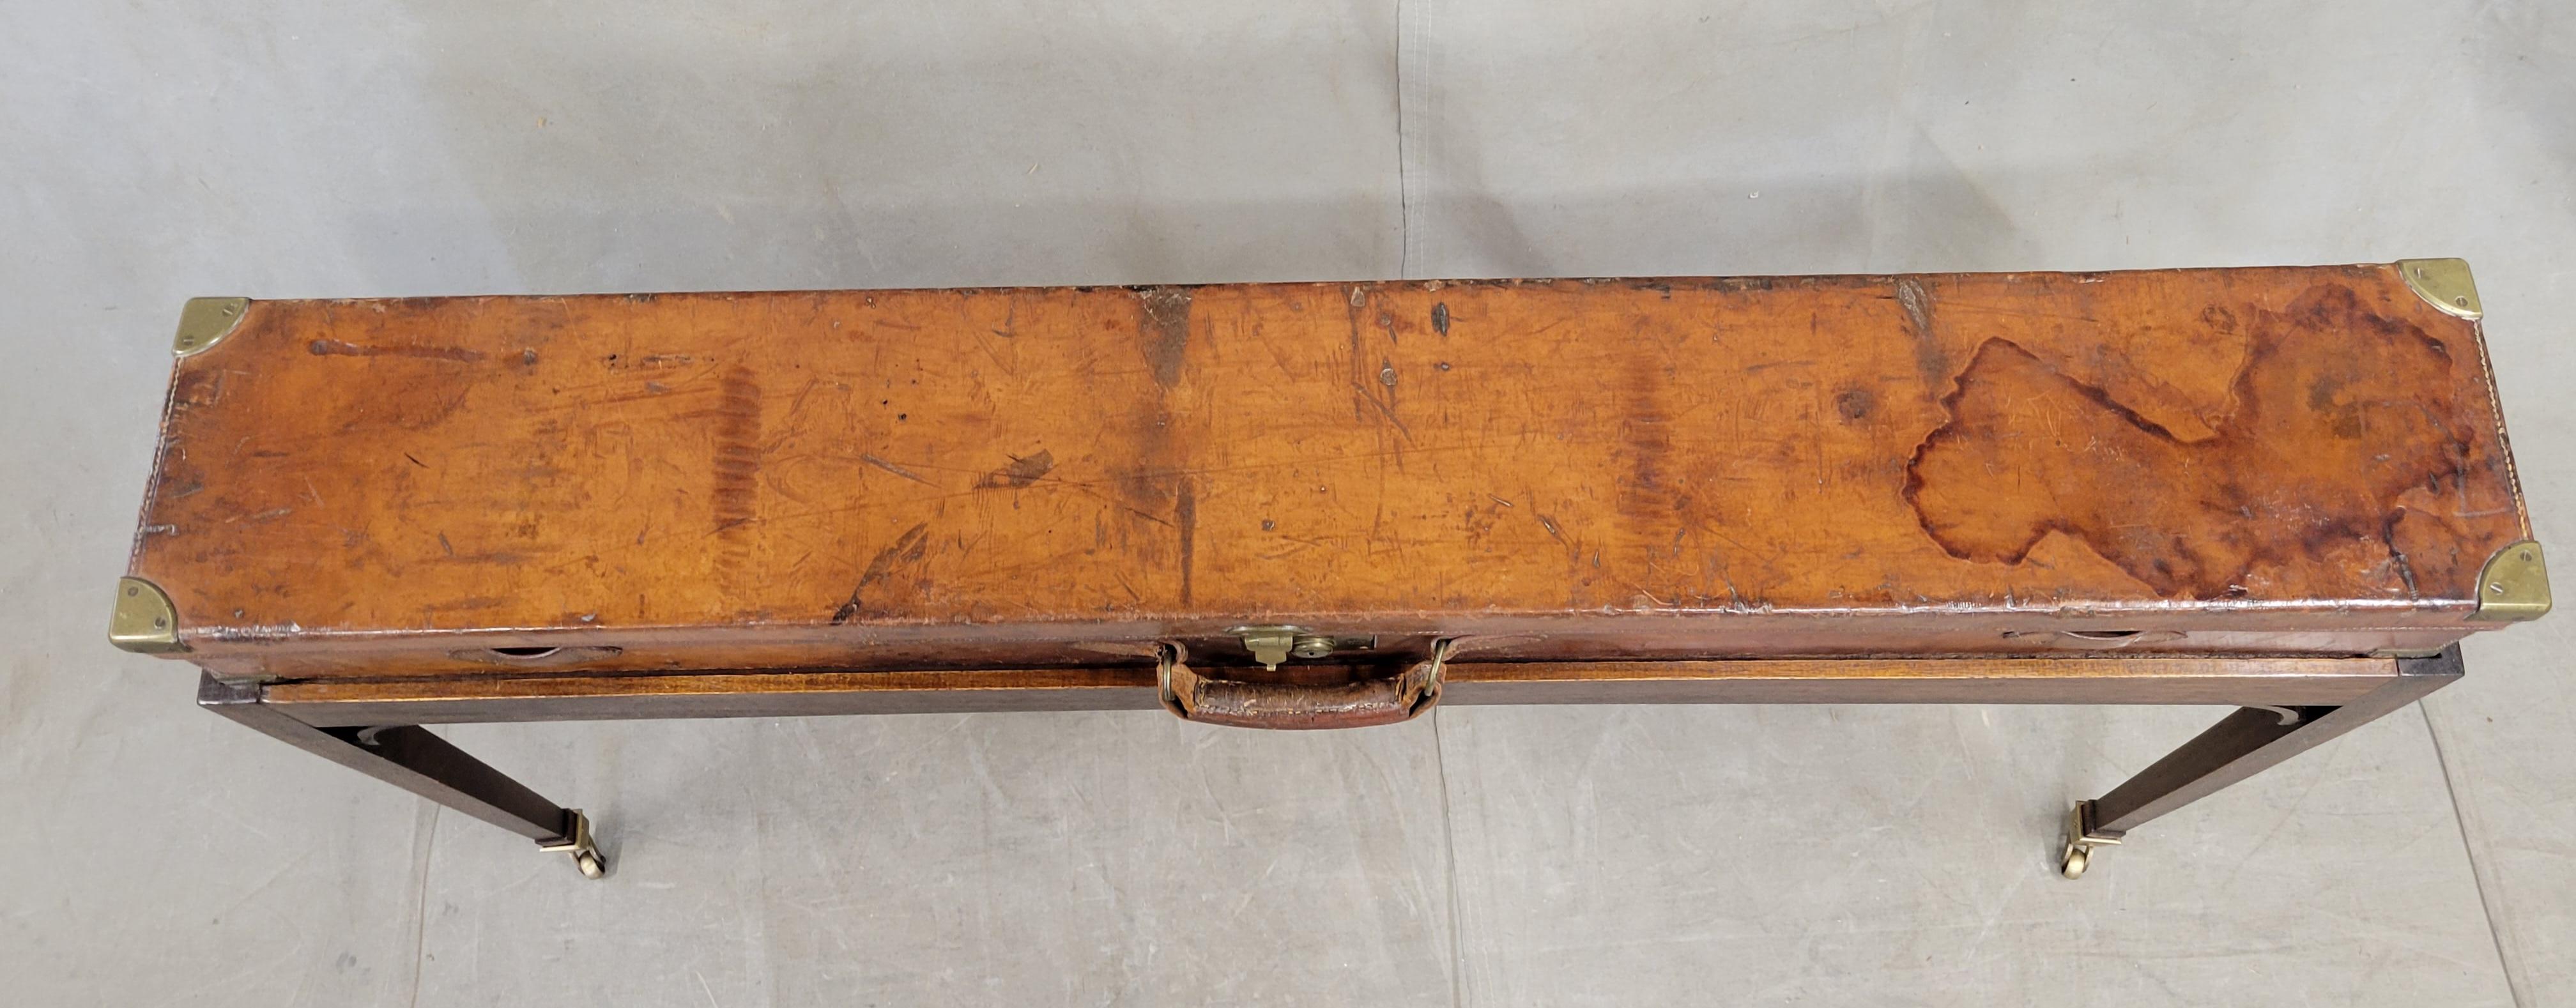 Hand-Crafted Antique English Leather Rifle Case and Mahogany Console Table